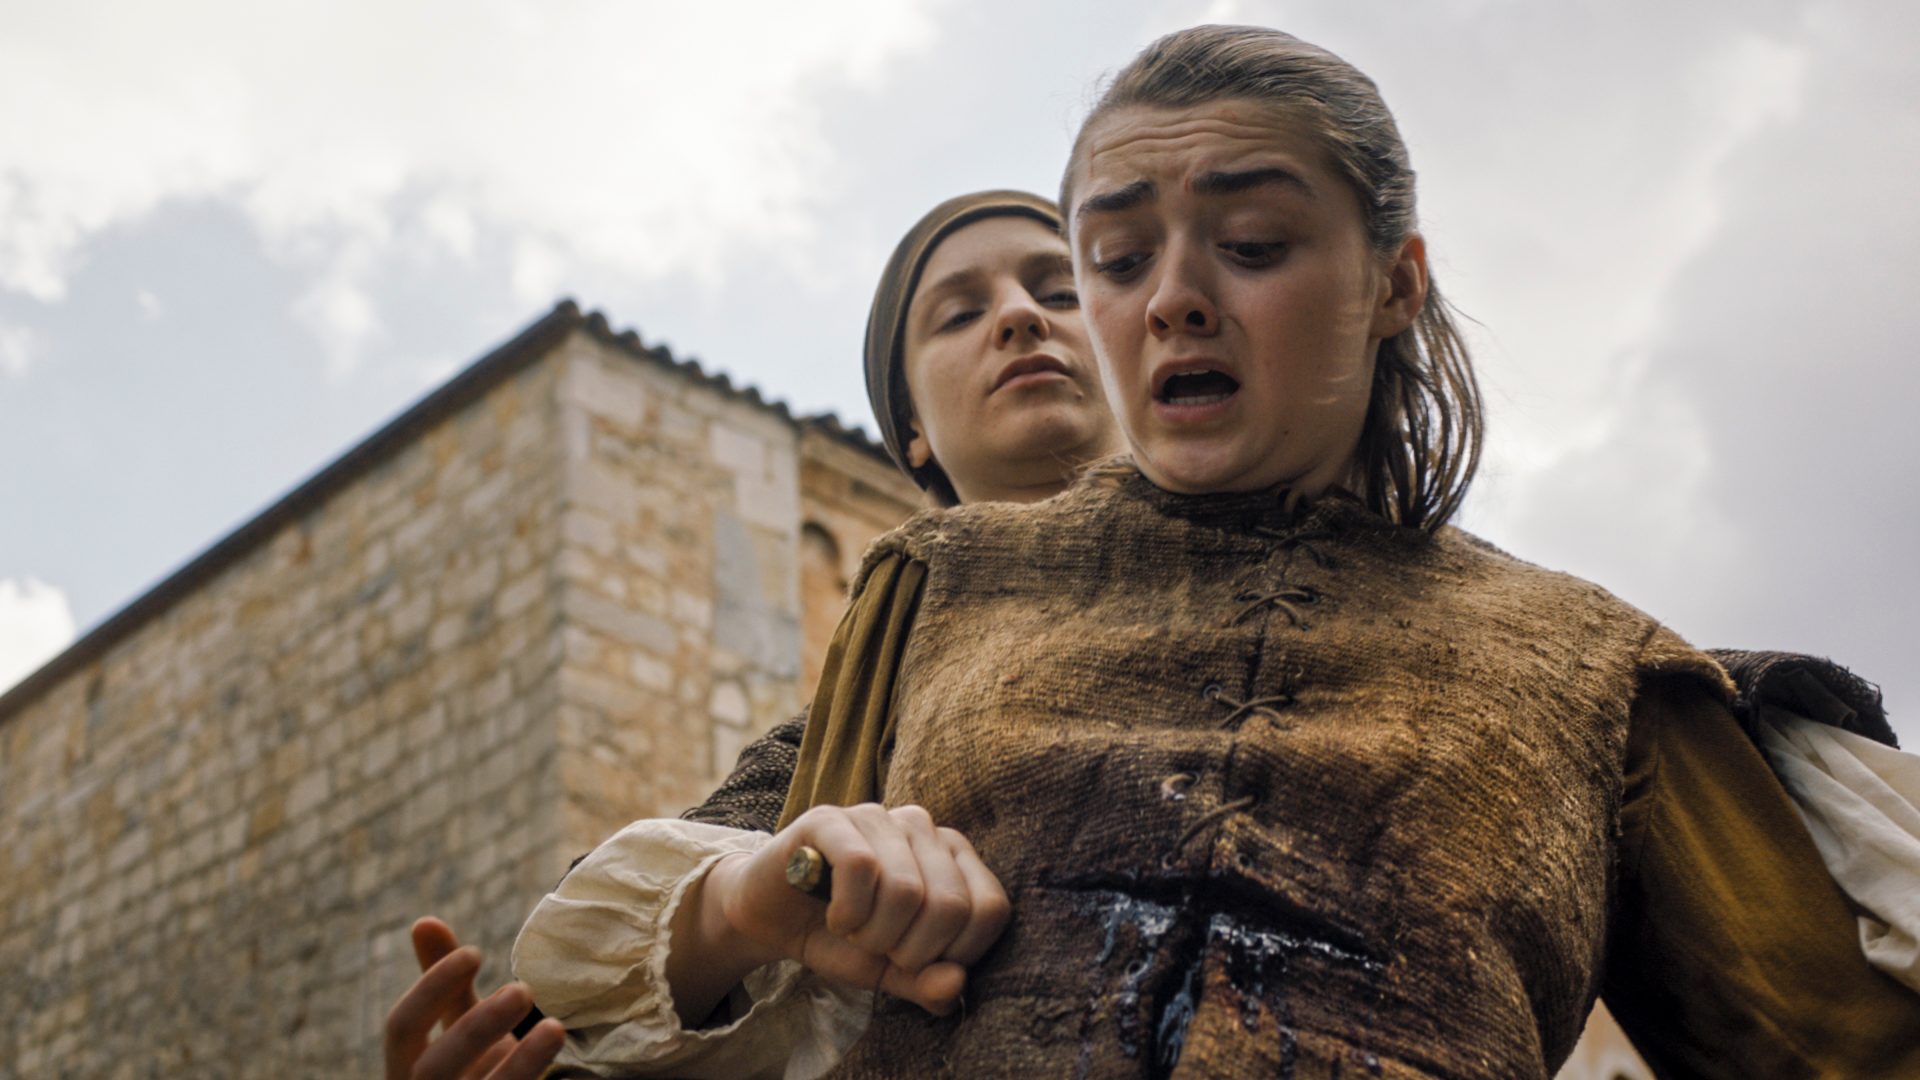 ‘Game of Thrones’ will end after season 8